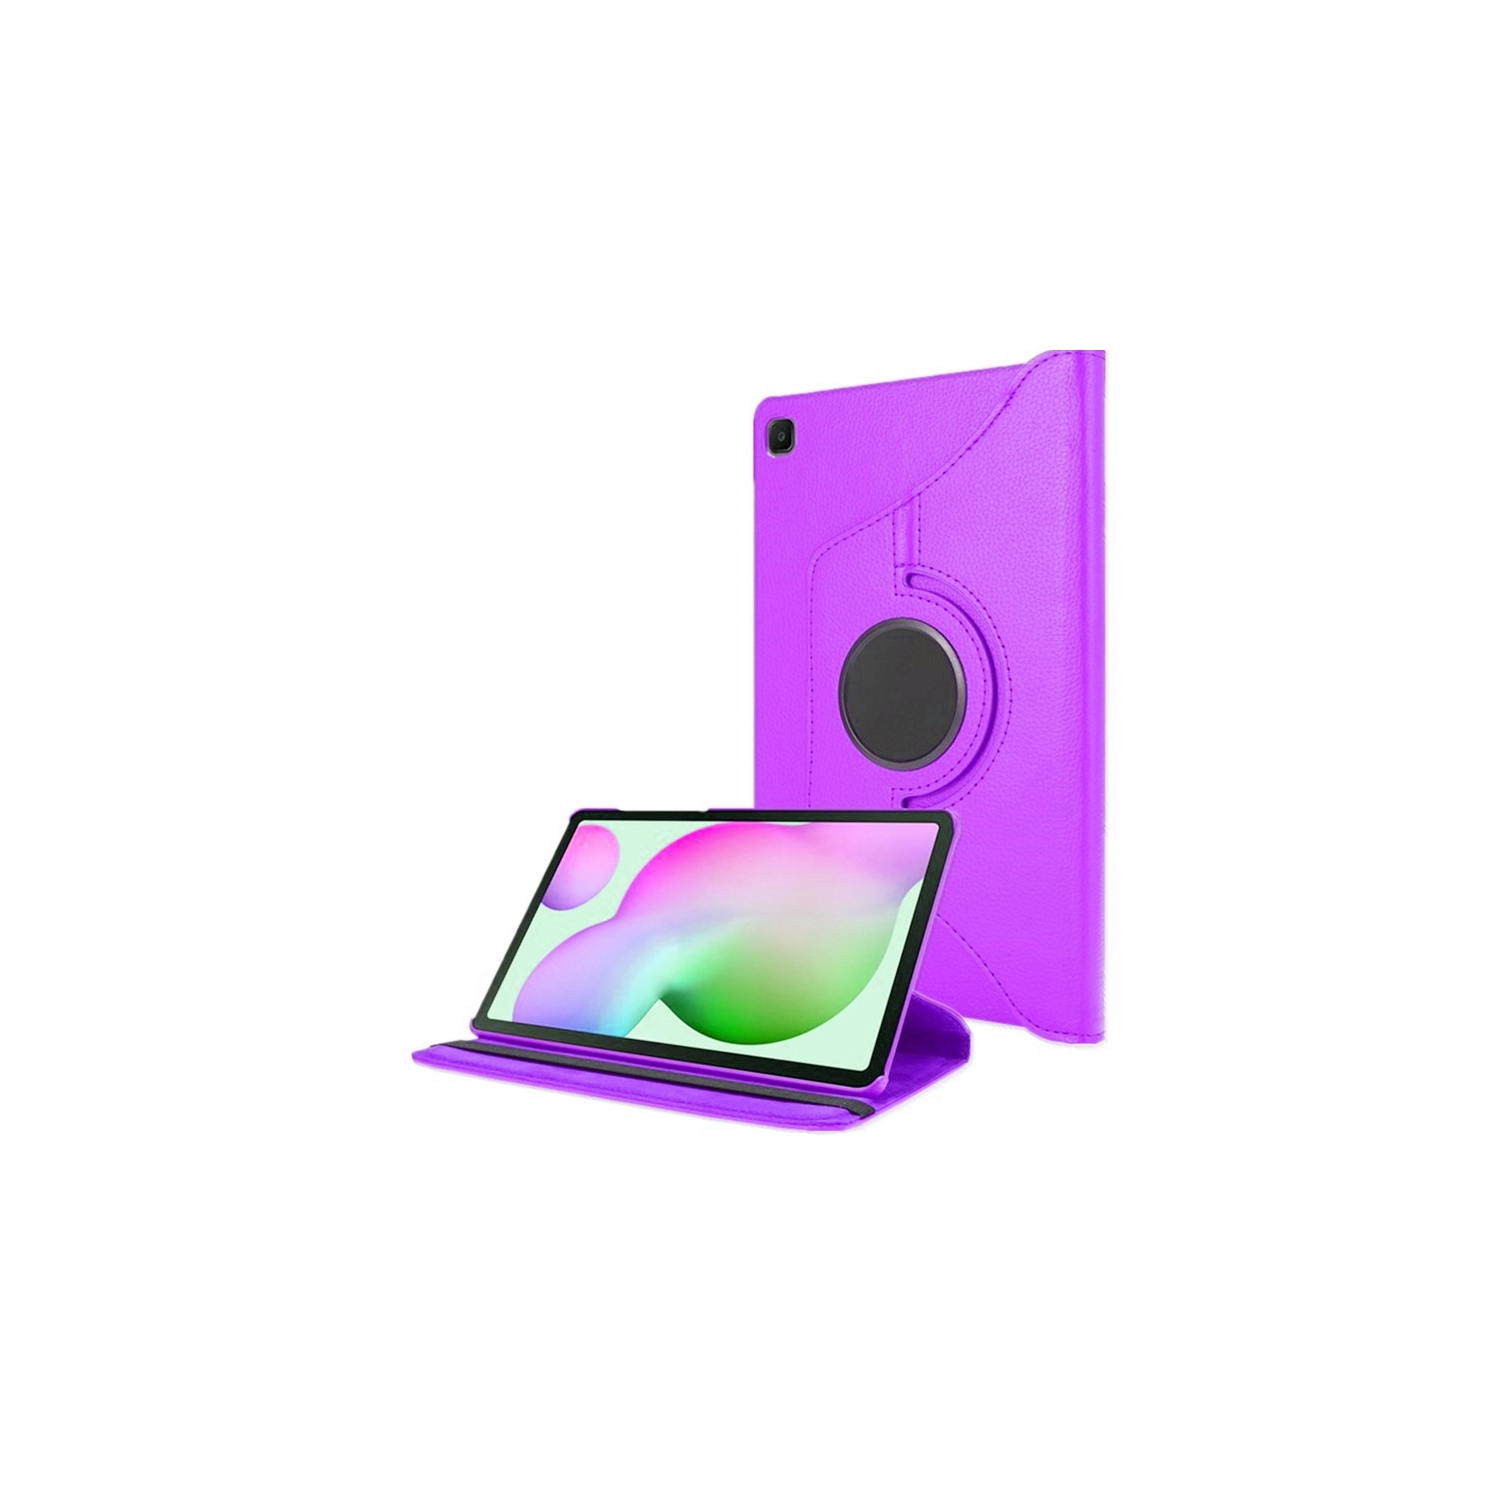 【CSmart】 360 Rotating PU Leather Stand Case Smart Cover for Samsung Galaxy Tab S6 Lite, P610 P615, Purple